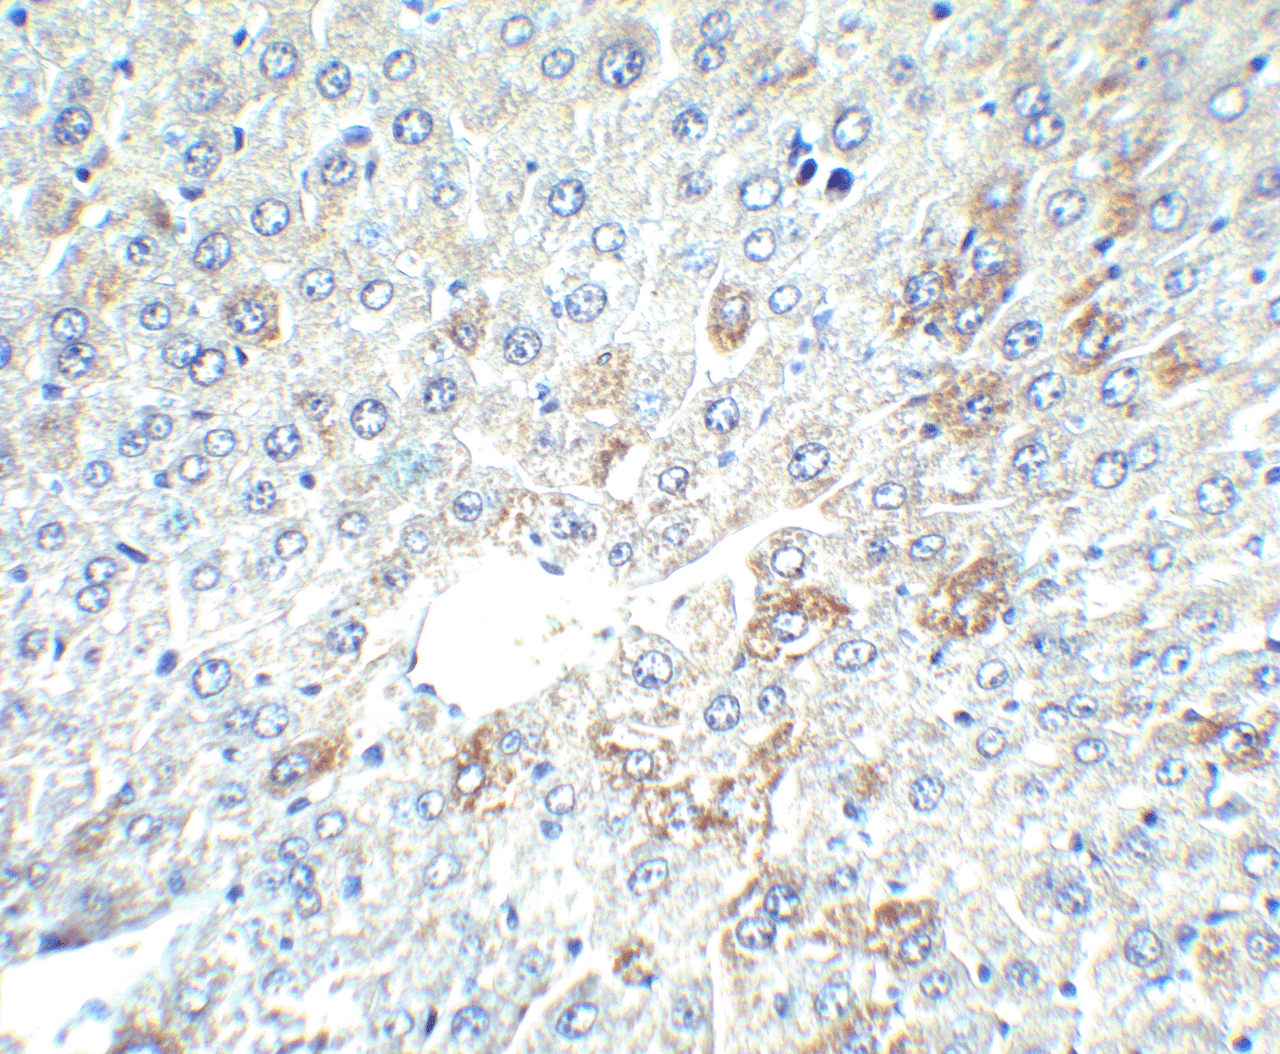 Immunohistochemistry of AFP in mouse liver tissue with AFP antibody at 2.5 ug/ml.